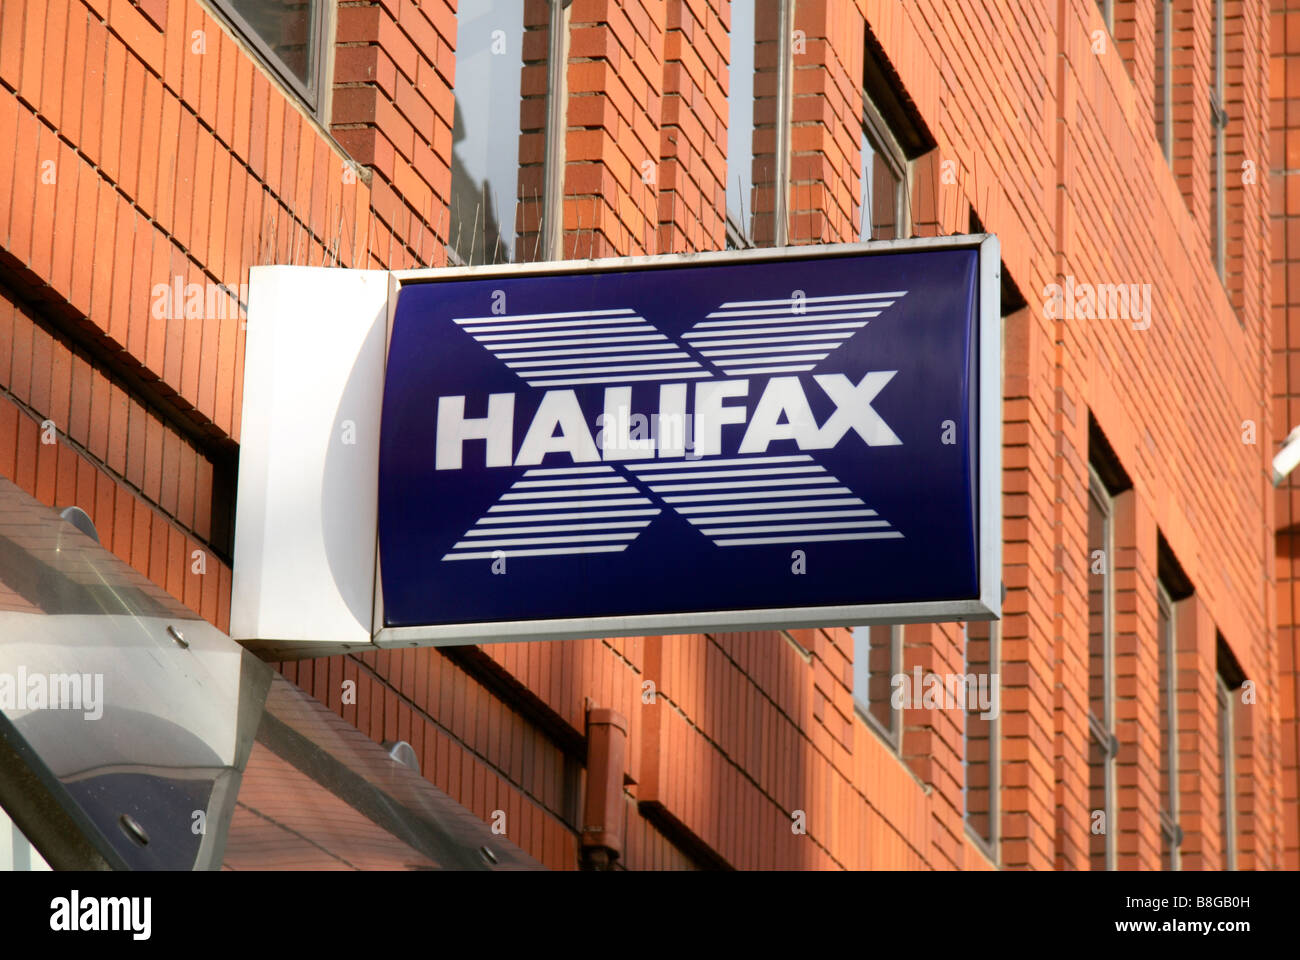 Entrance sign above the Halifax branch in Knightsbridge, London. Feb 2009 Stock Photo